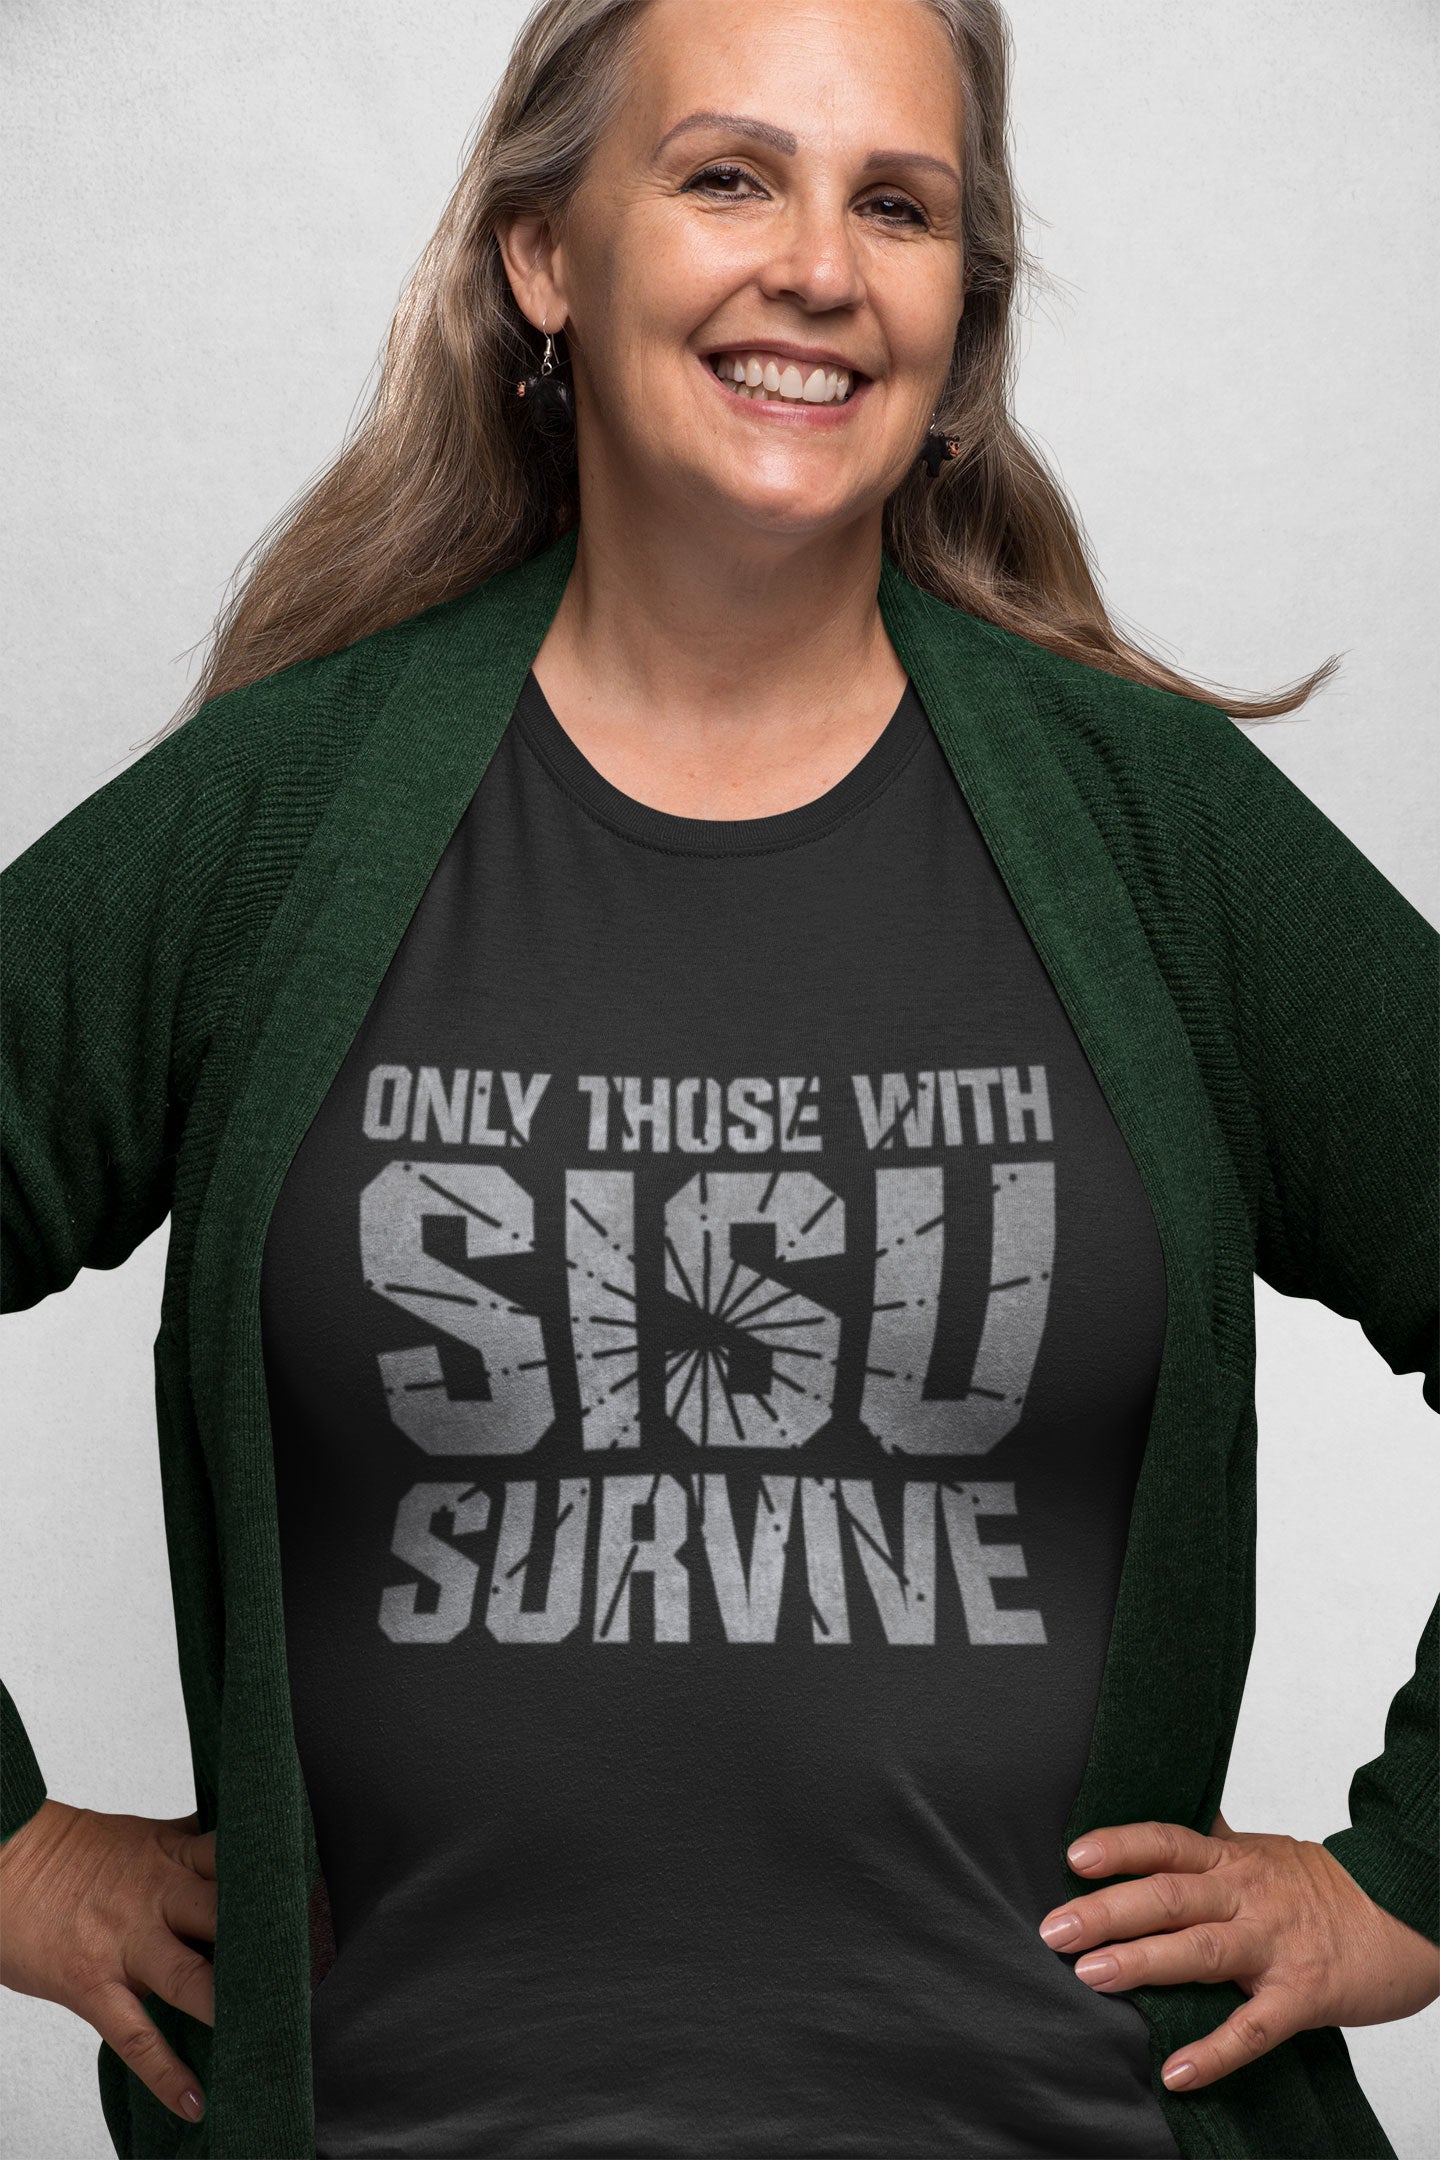 Sisu Shirt - Only Those With Sisu Survive - Gift for Finns